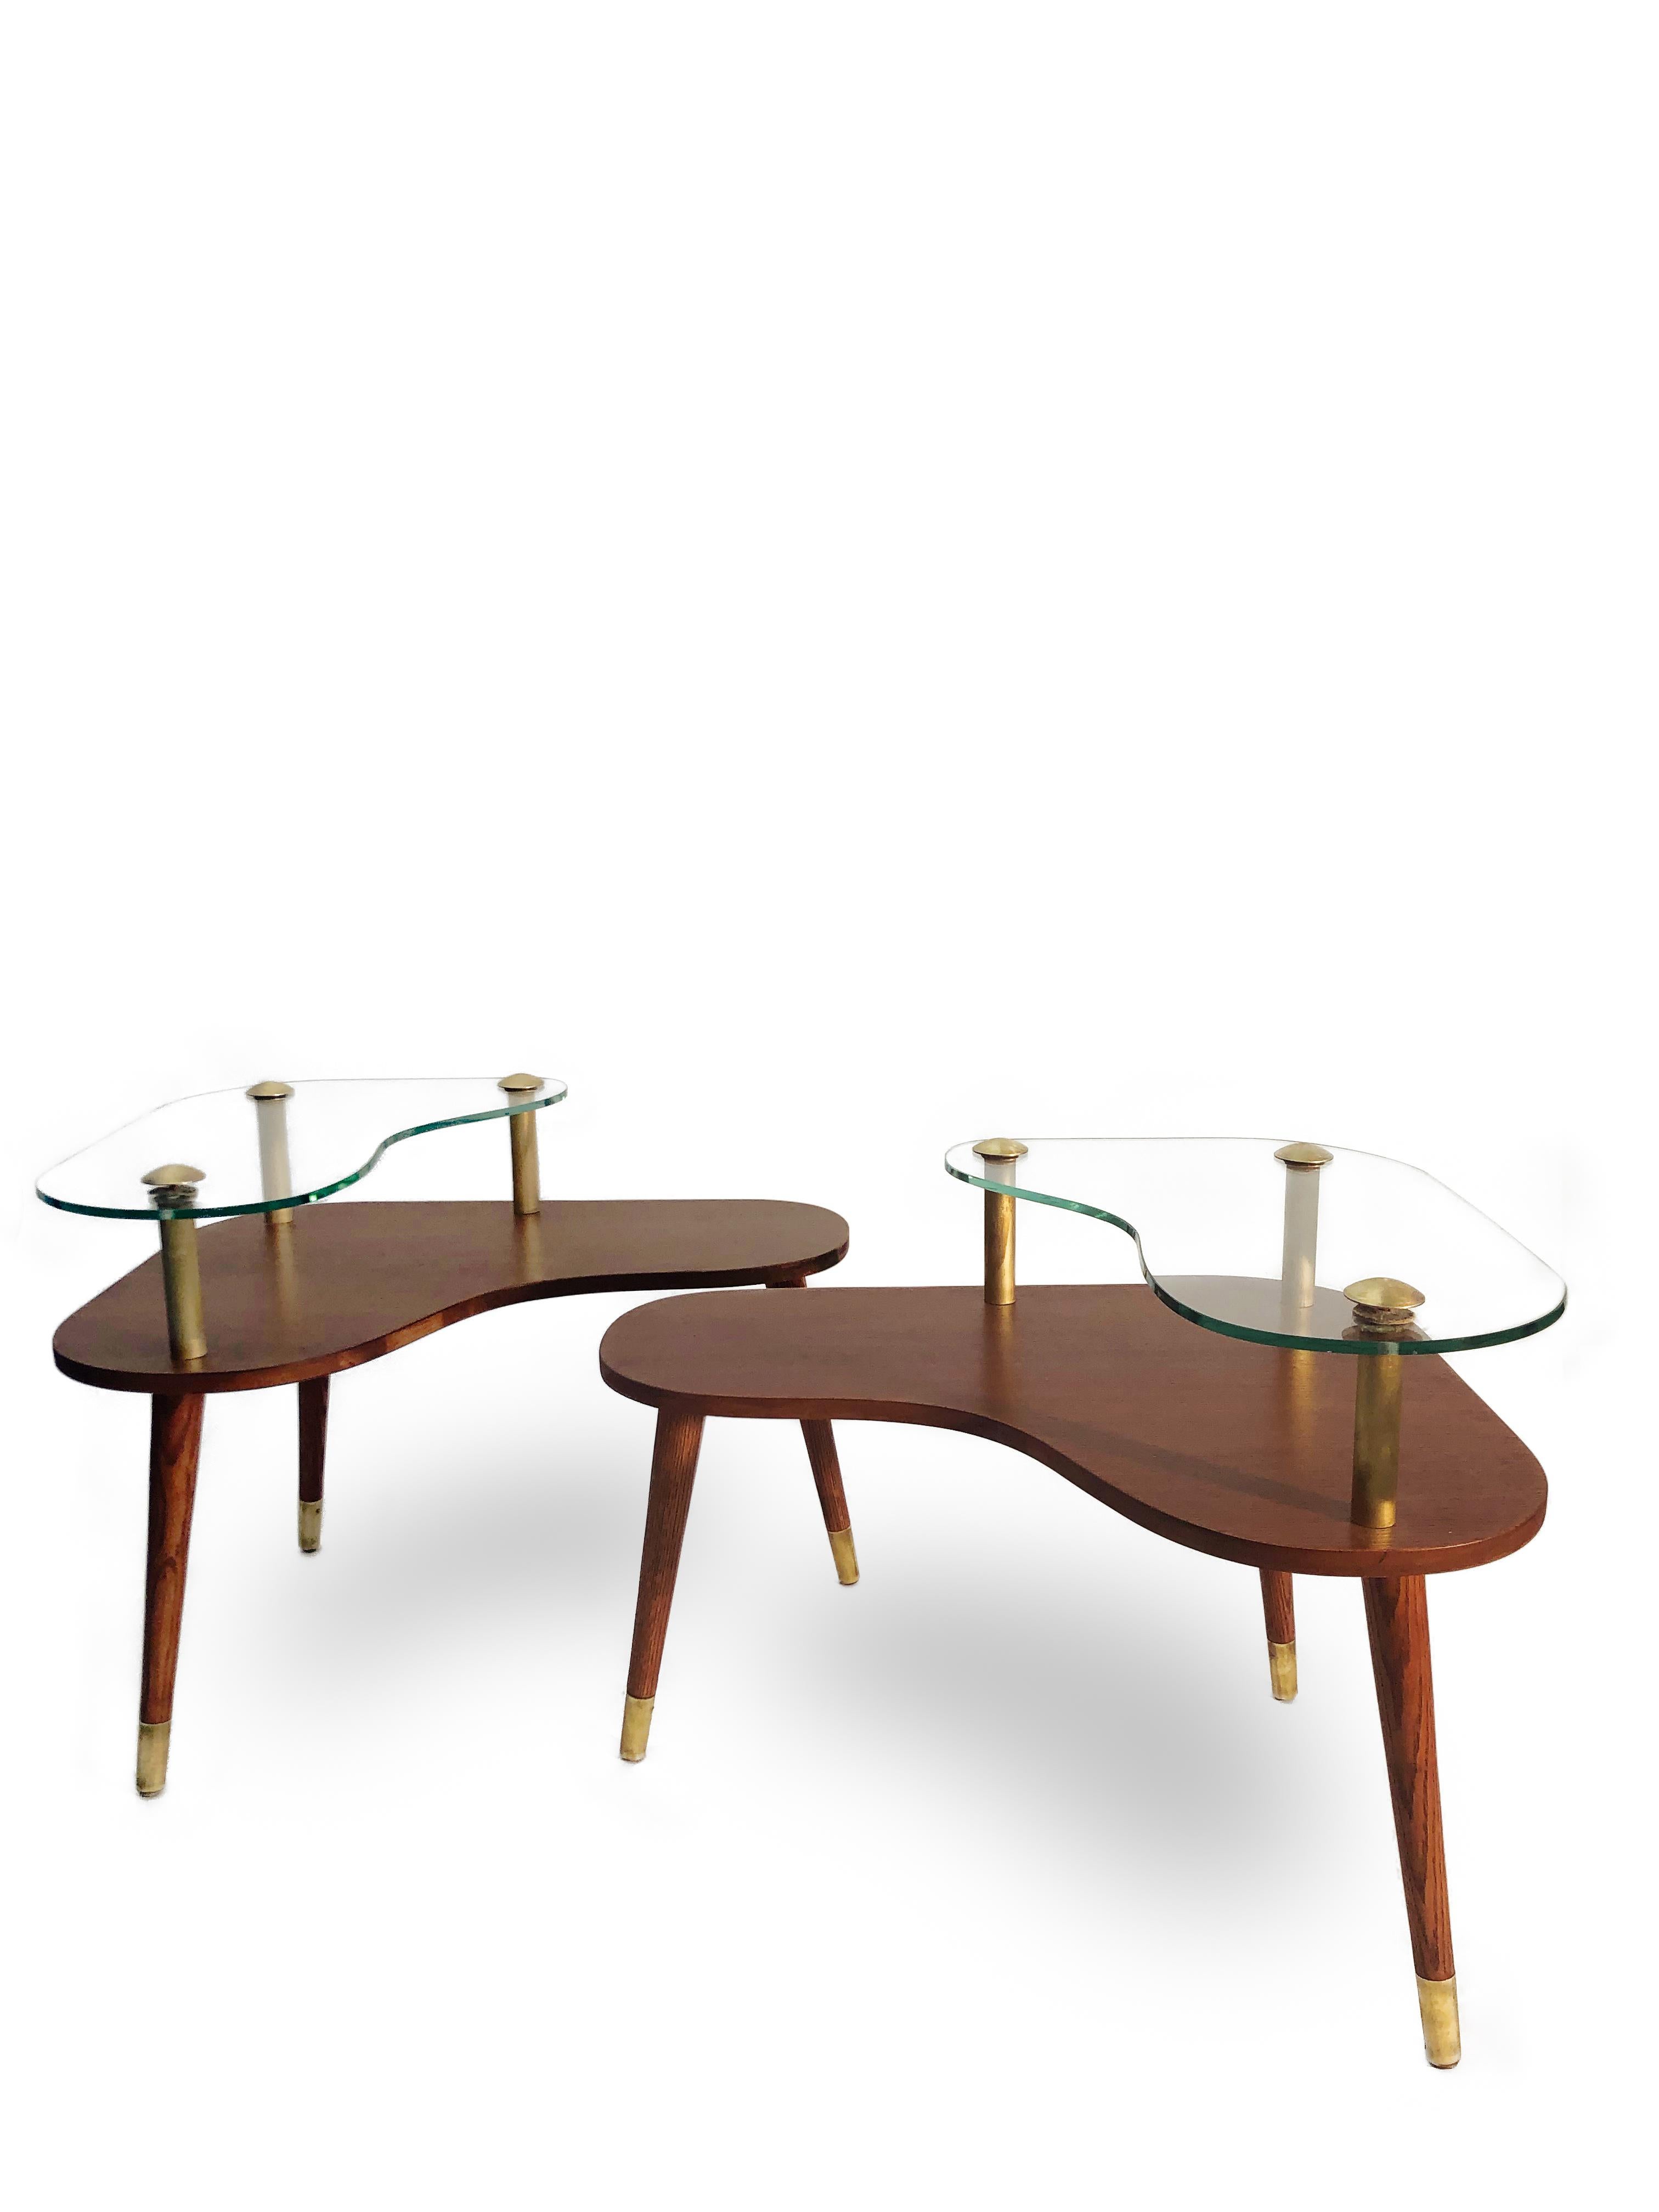 Mid-20th Century Pair of Sculptural Mid-Century Modern Side Tables, circa 1960 For Sale